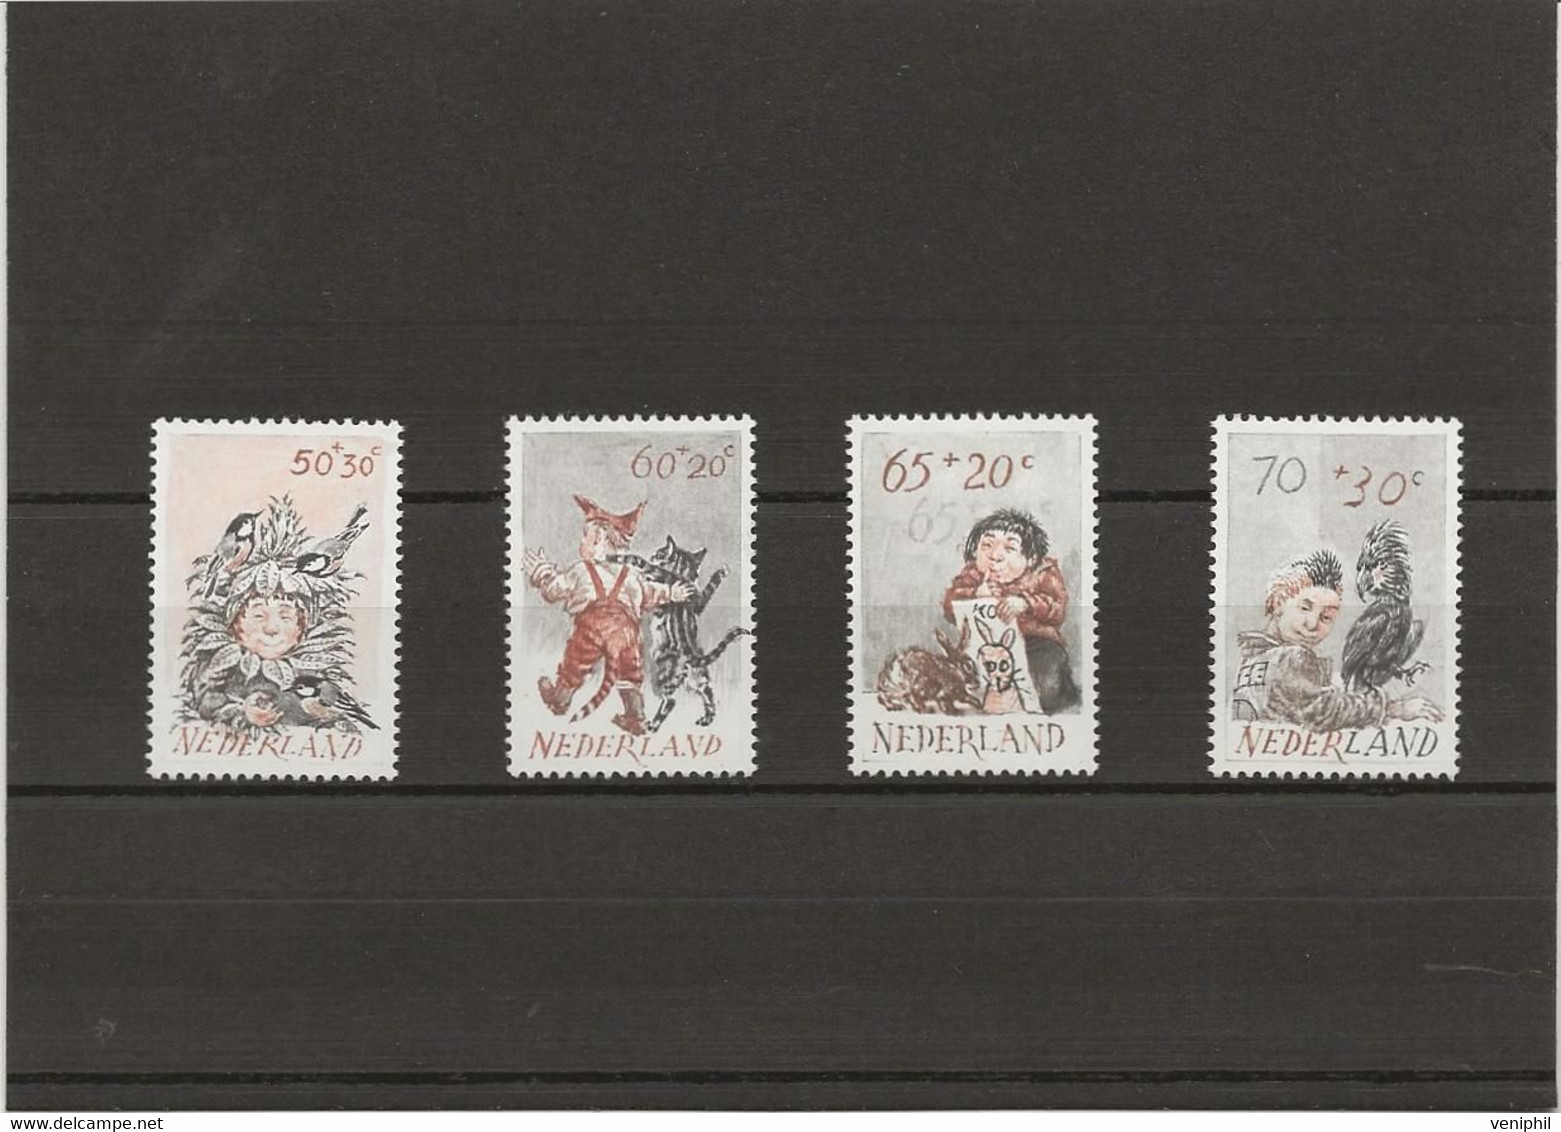 PAYS-BAS - SERIE N° 1193 A 1196  NEUF SANS CHARNIERE - ANNEE 1982 - Unused Stamps